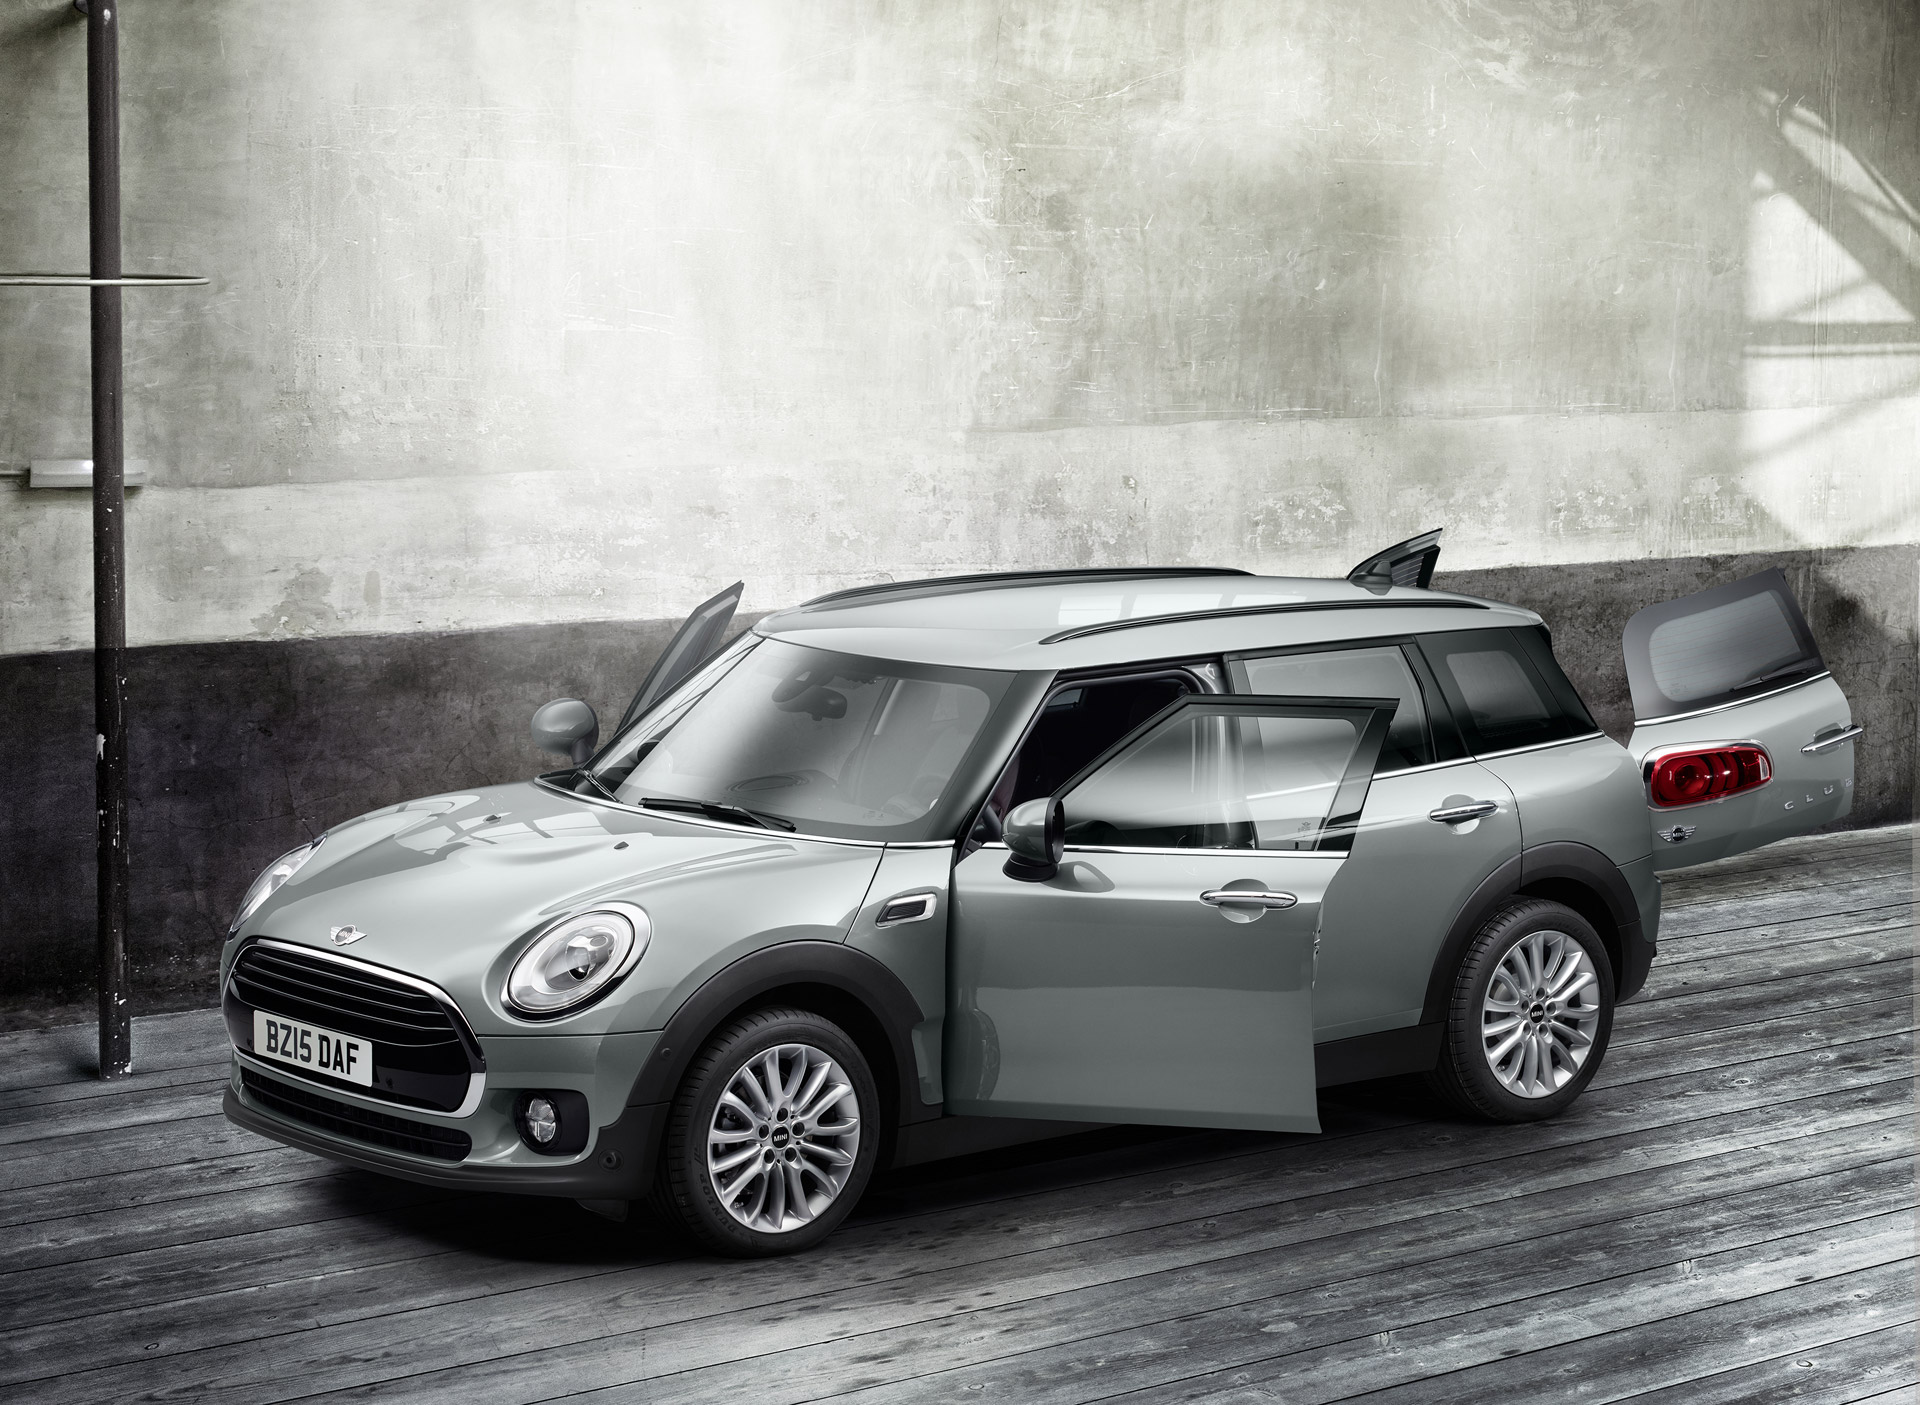 2016 MINI Cooper Clubman Grows Up Into More Maxi Wagon With Six Doors